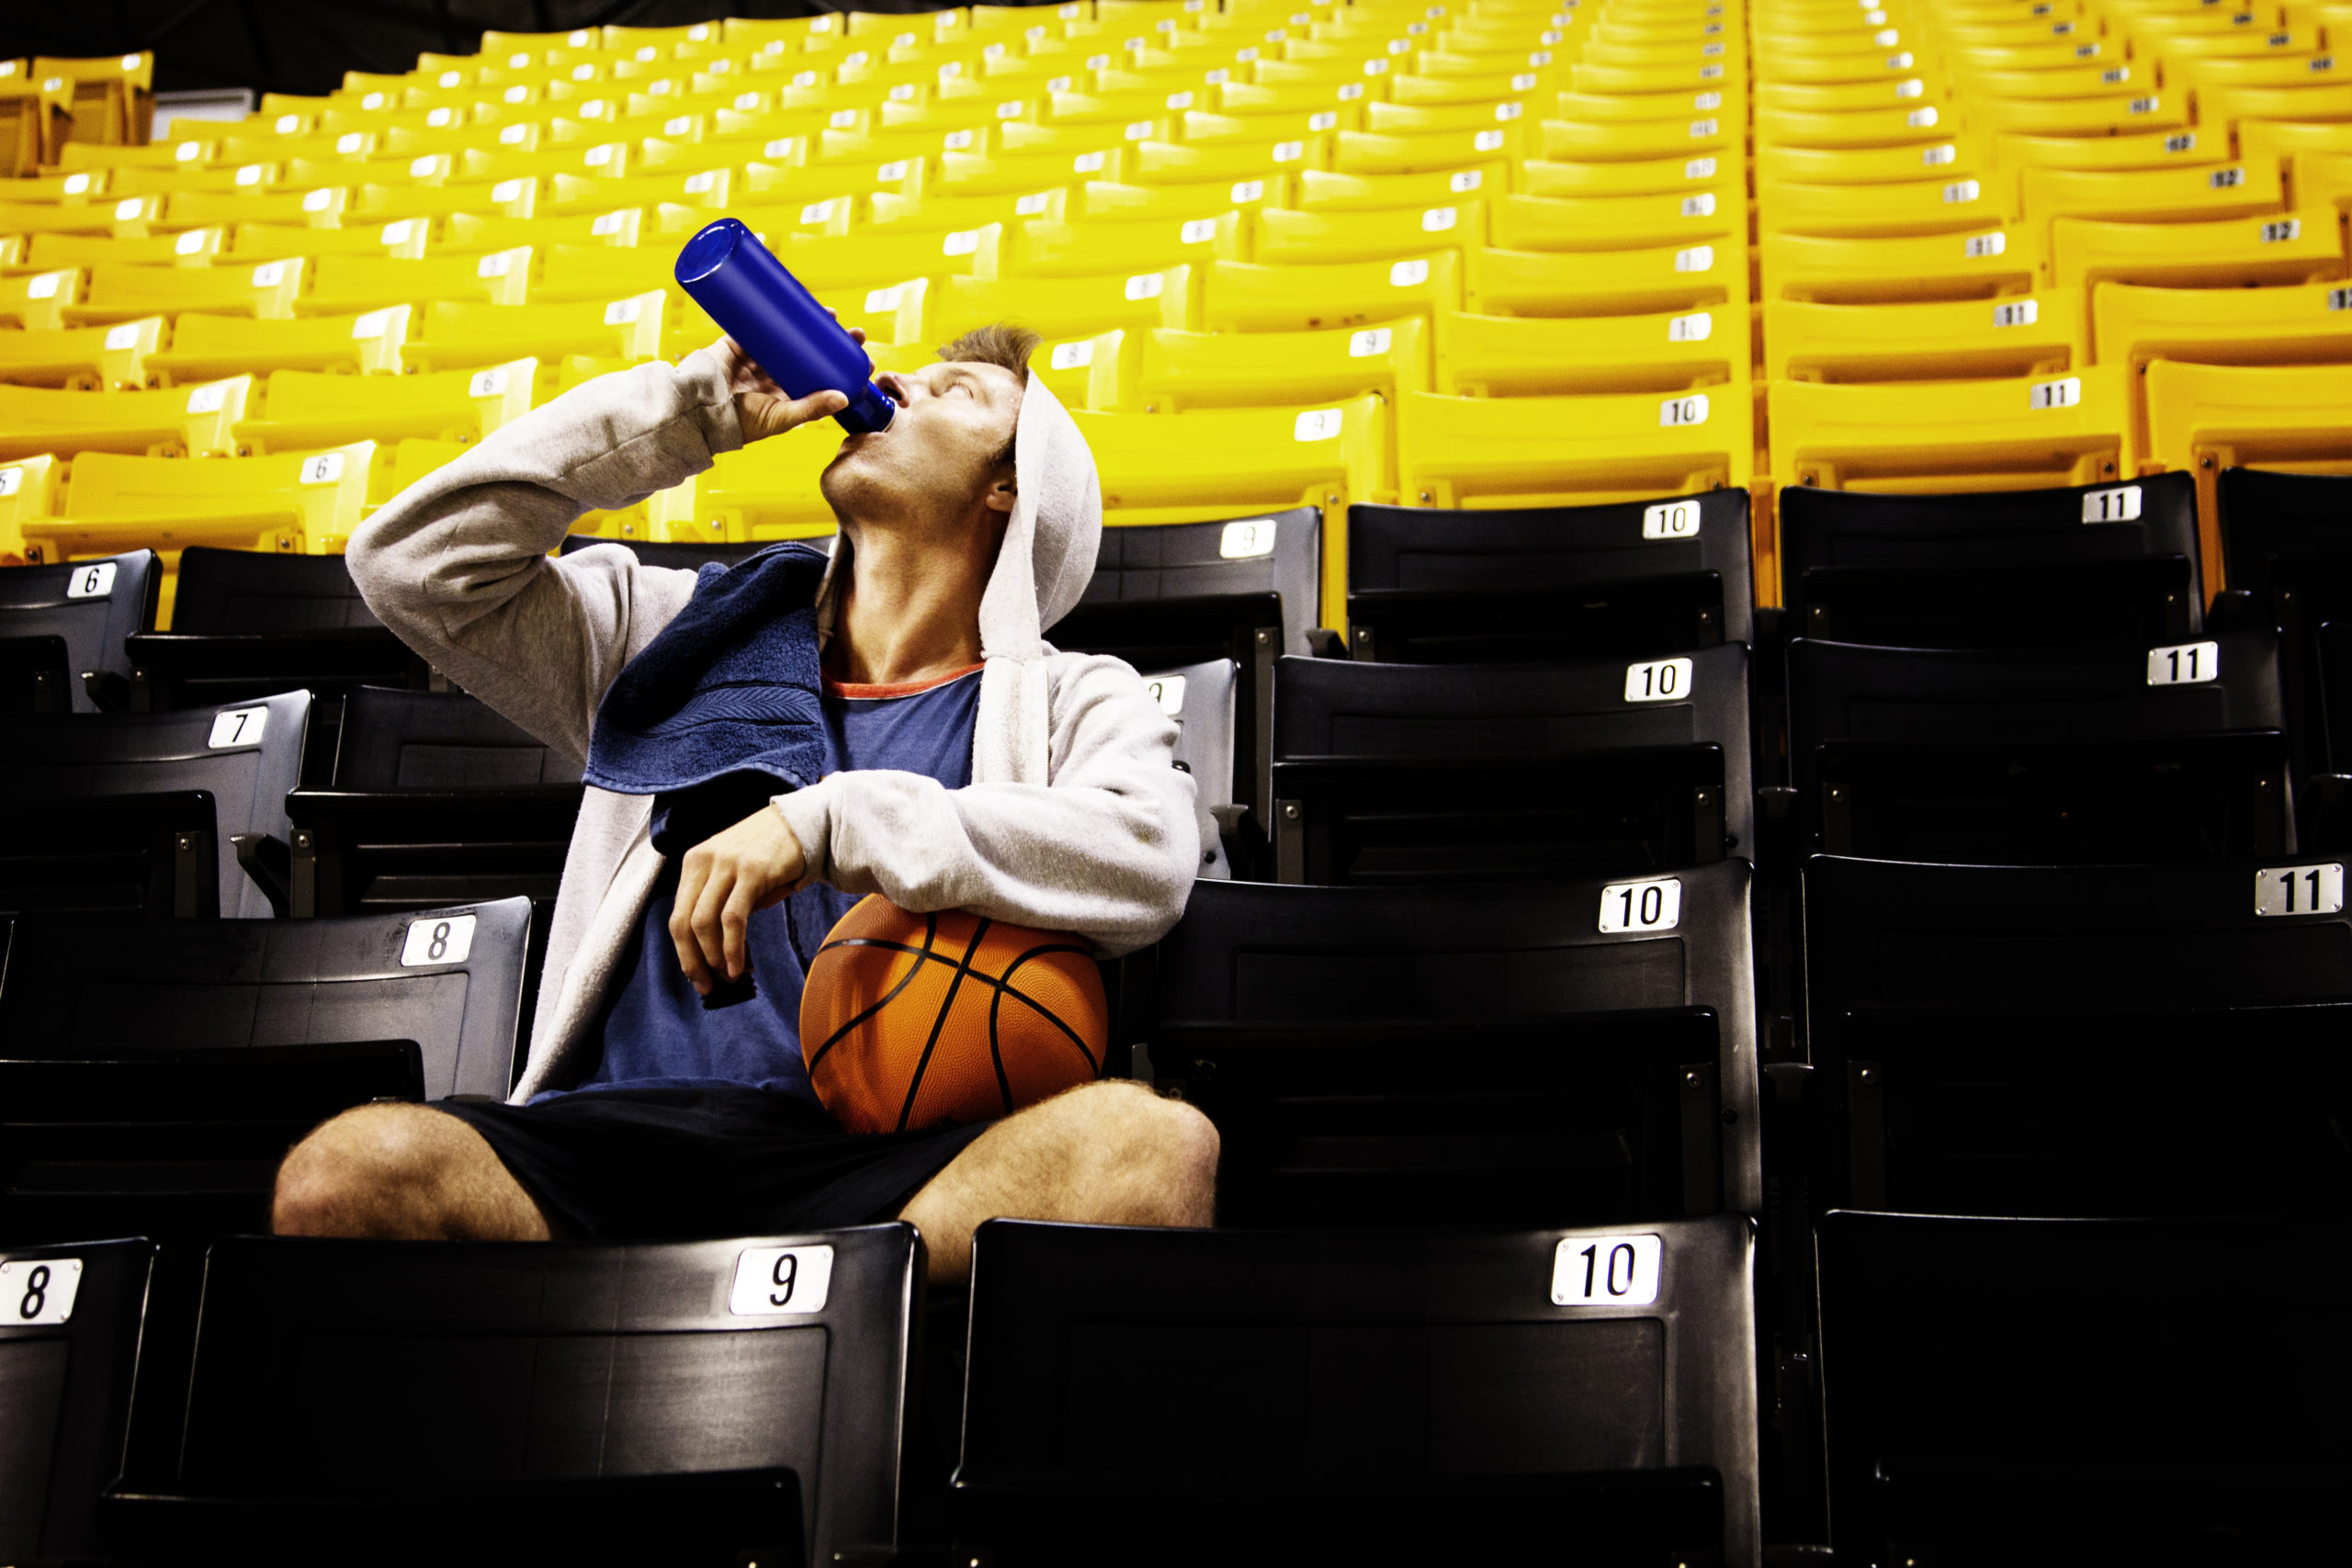 Man With Basketball Drinking Water While Sitting O 2022 03 09 02 31 05 Utc Scaled